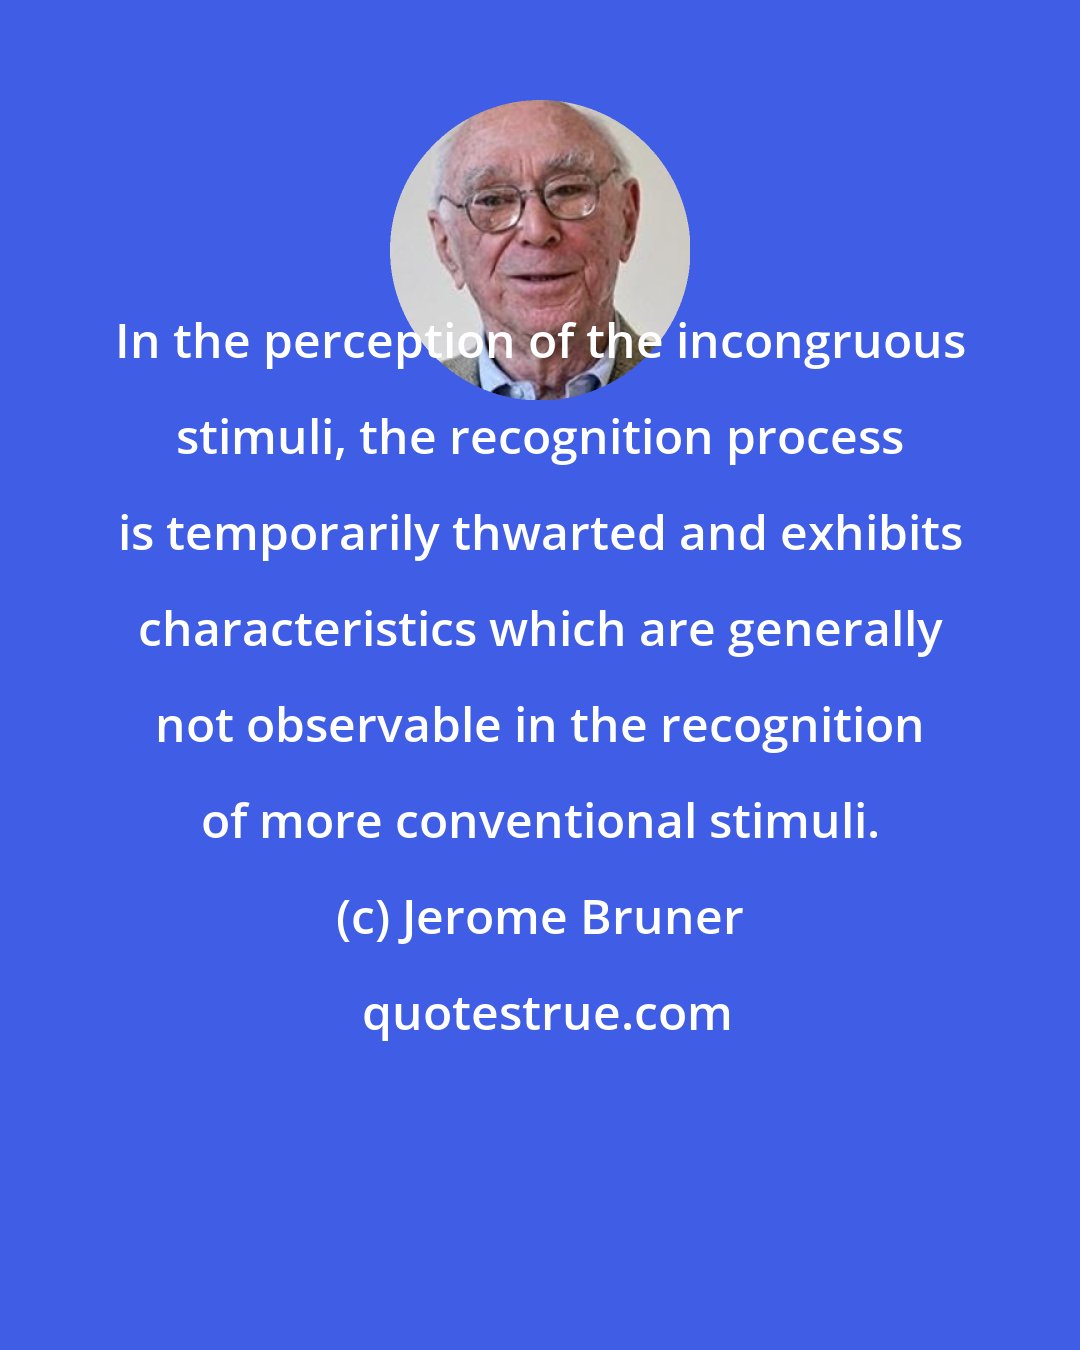 Jerome Bruner: In the perception of the incongruous stimuli, the recognition process is temporarily thwarted and exhibits characteristics which are generally not observable in the recognition of more conventional stimuli.